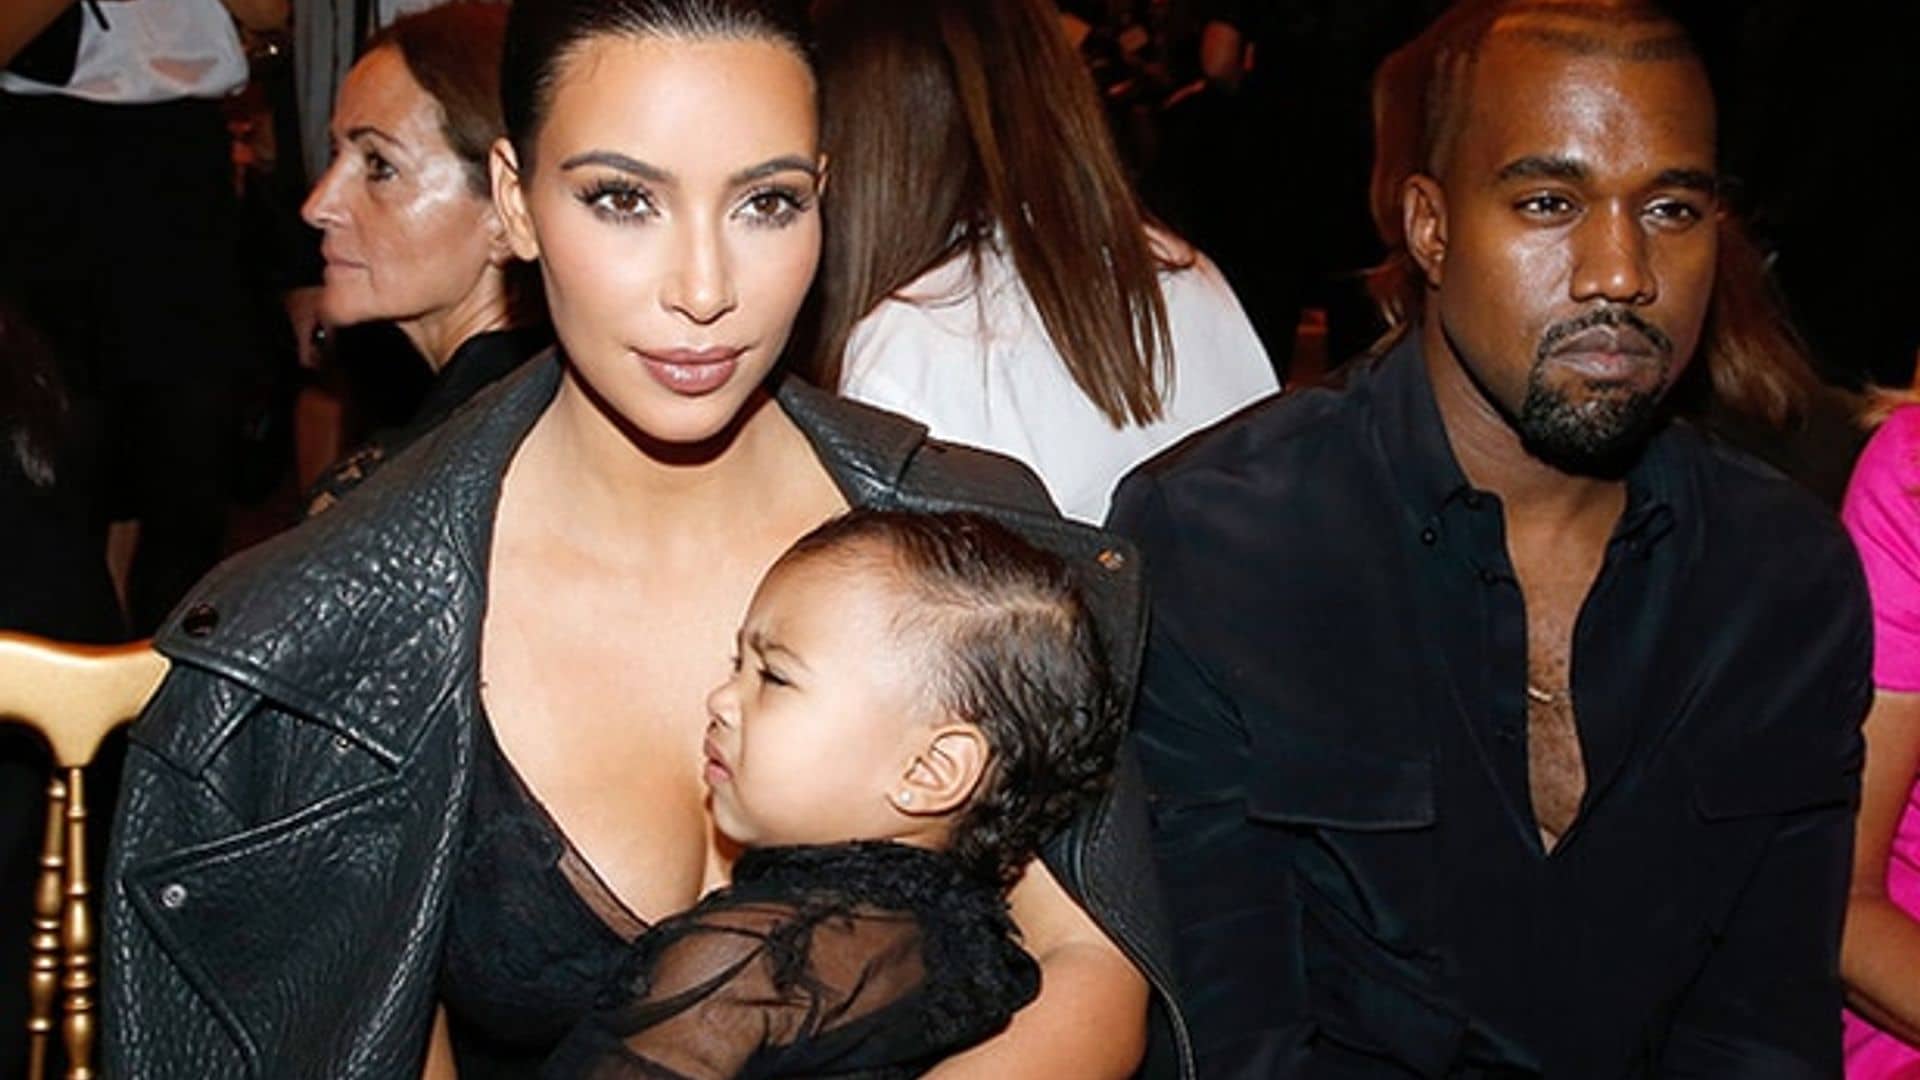 Little North accompanied Kim and Kanye at Paris Fashion Week, dressed impeccably of course.